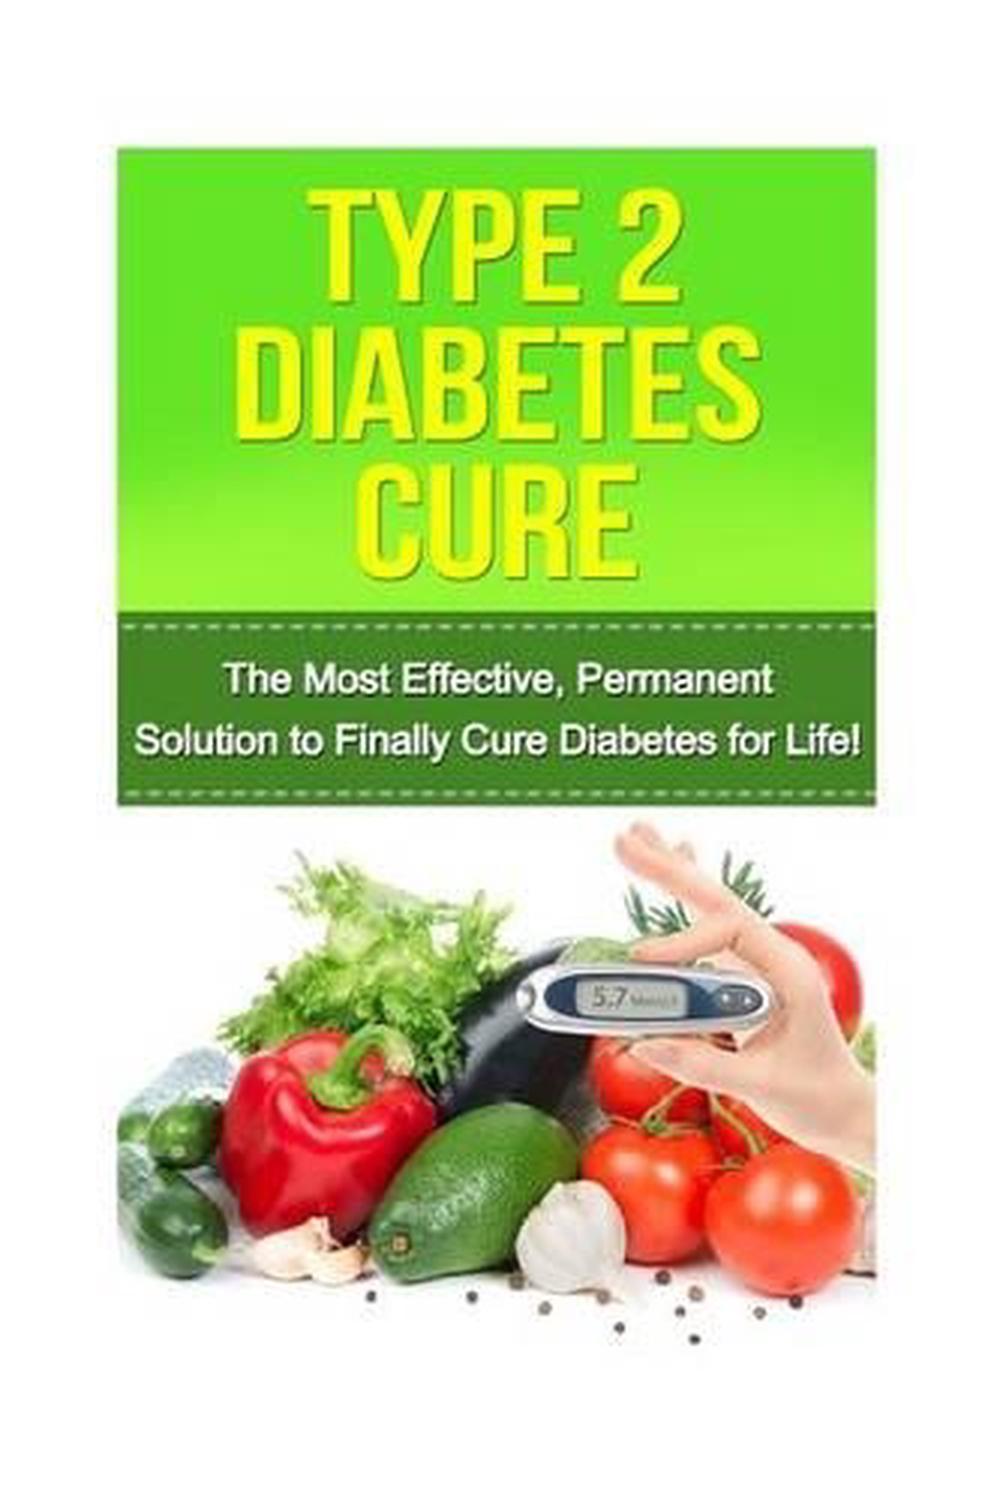 research on cure for type 2 diabetes